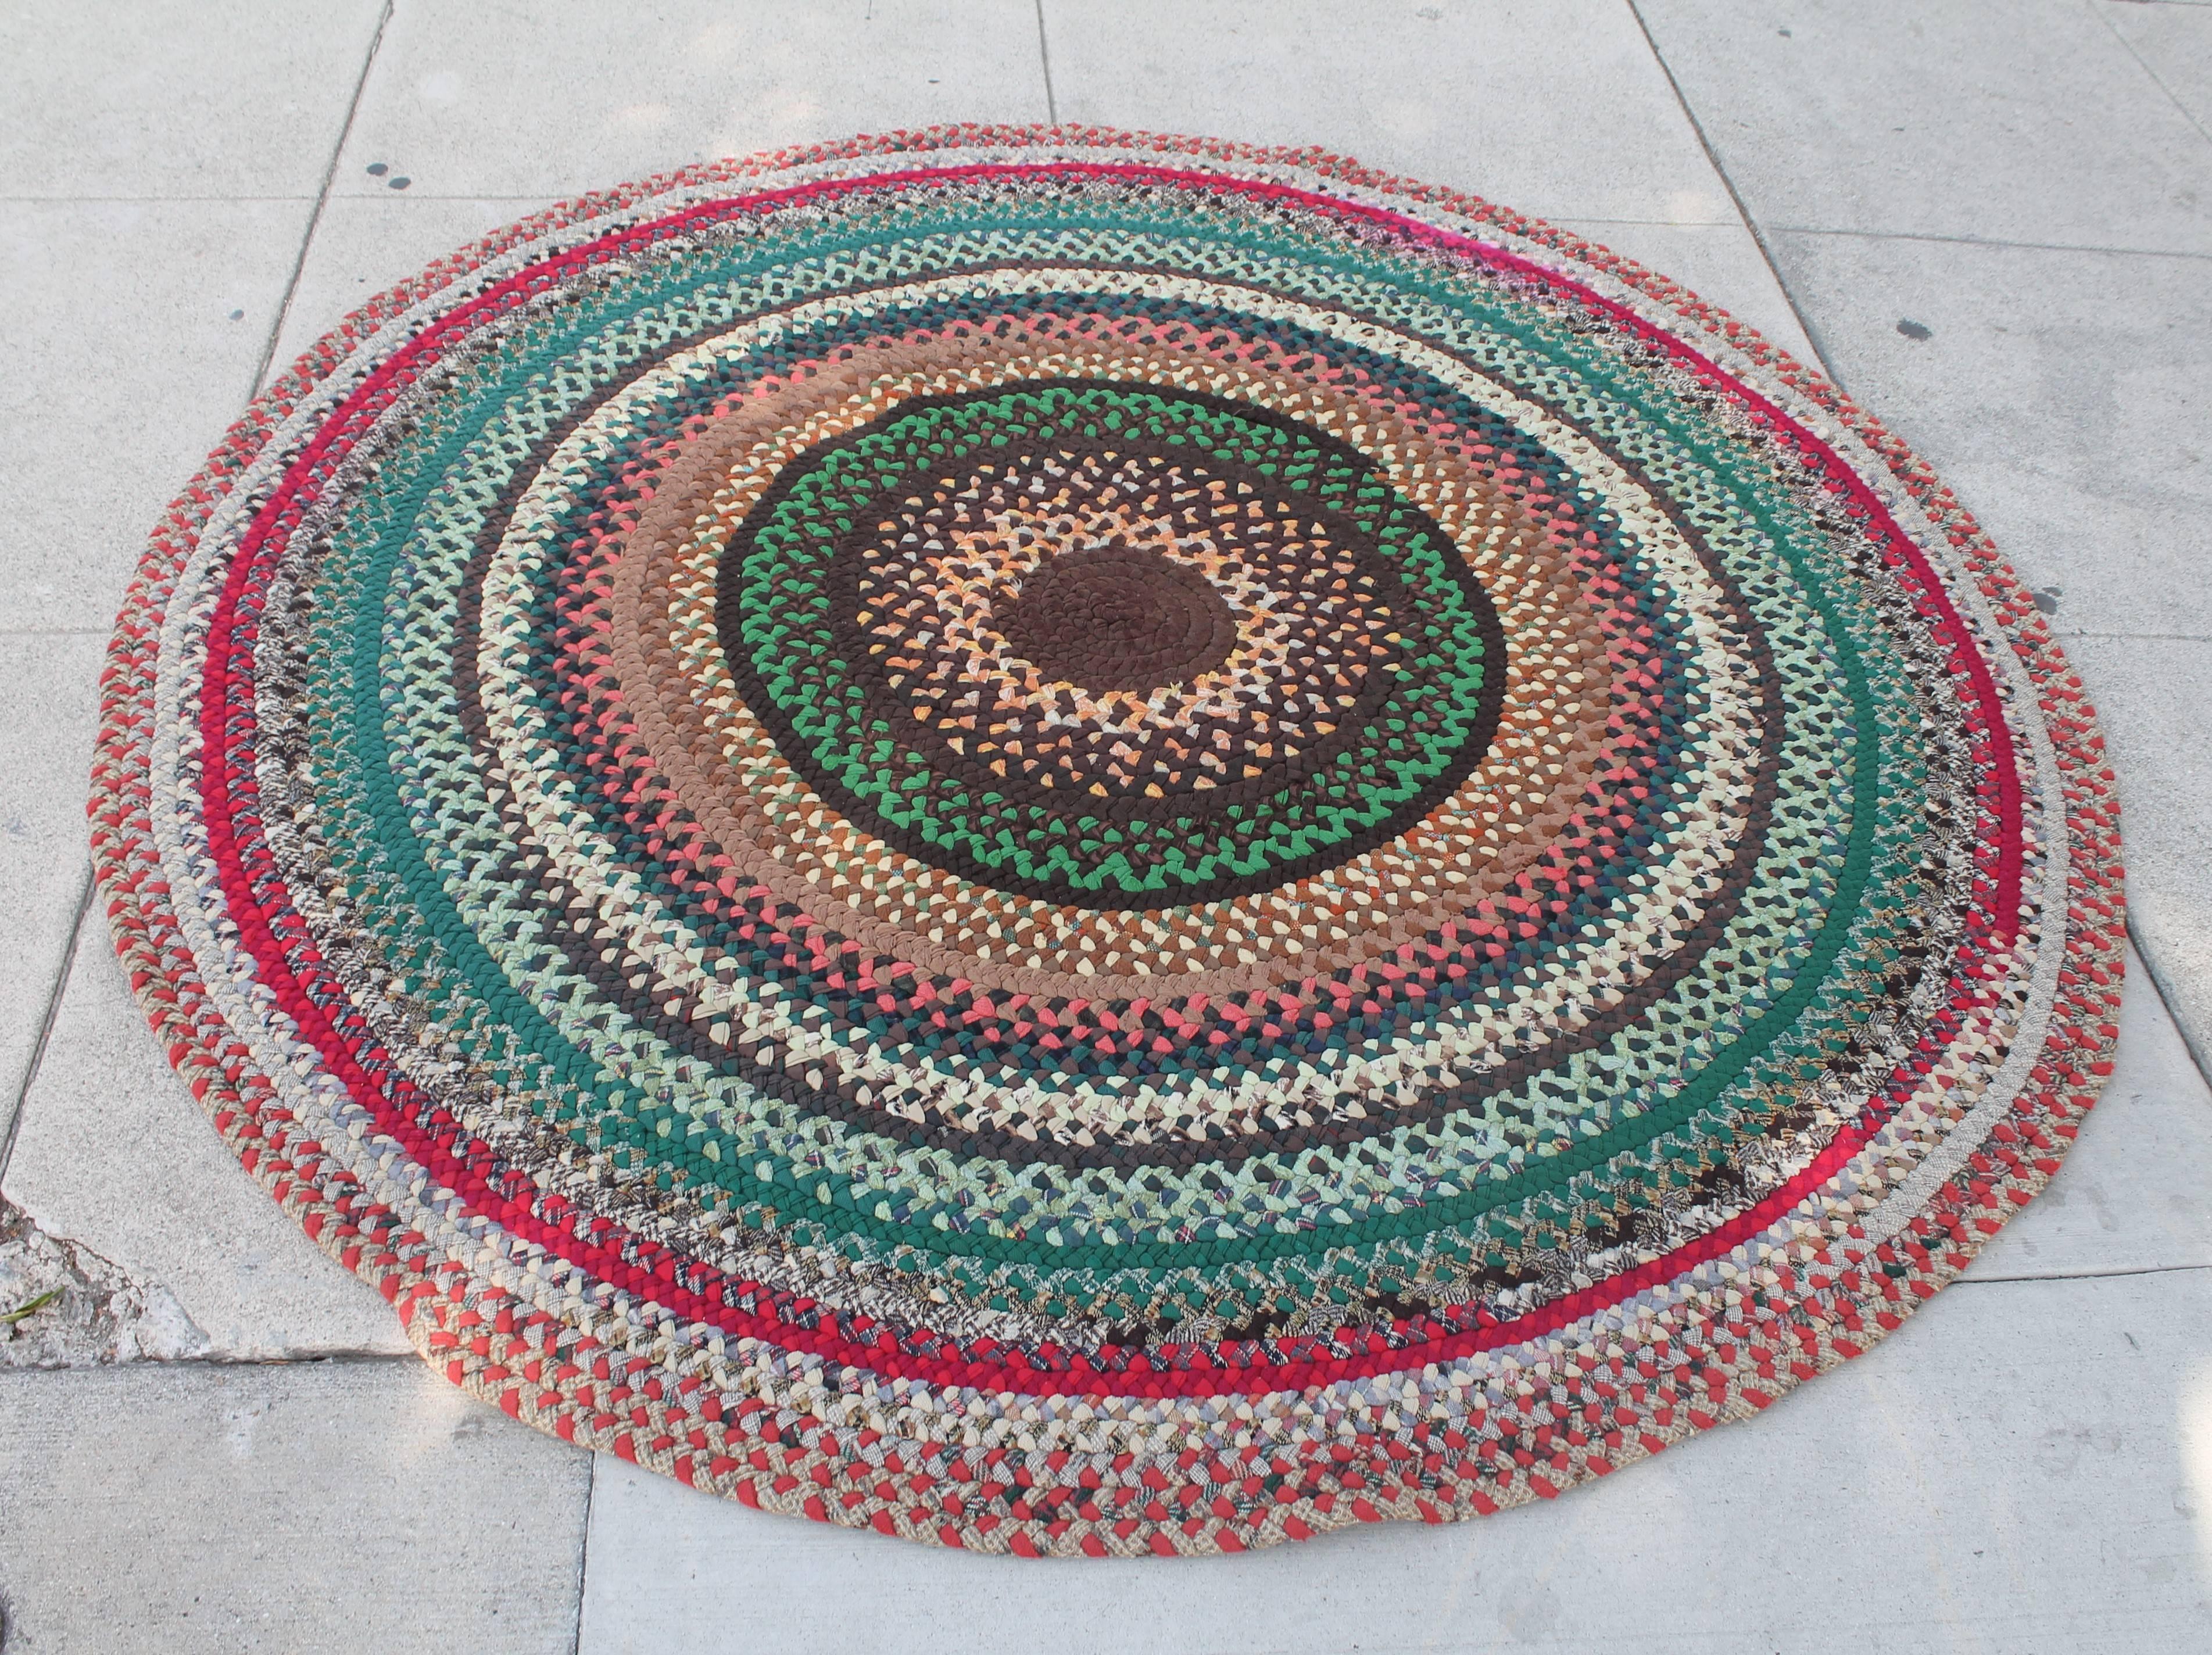 This round area rug is in good condition and measure seven foot round. The colors are really wonderful. The rug is all wool. Minor wear on edge of the rug.